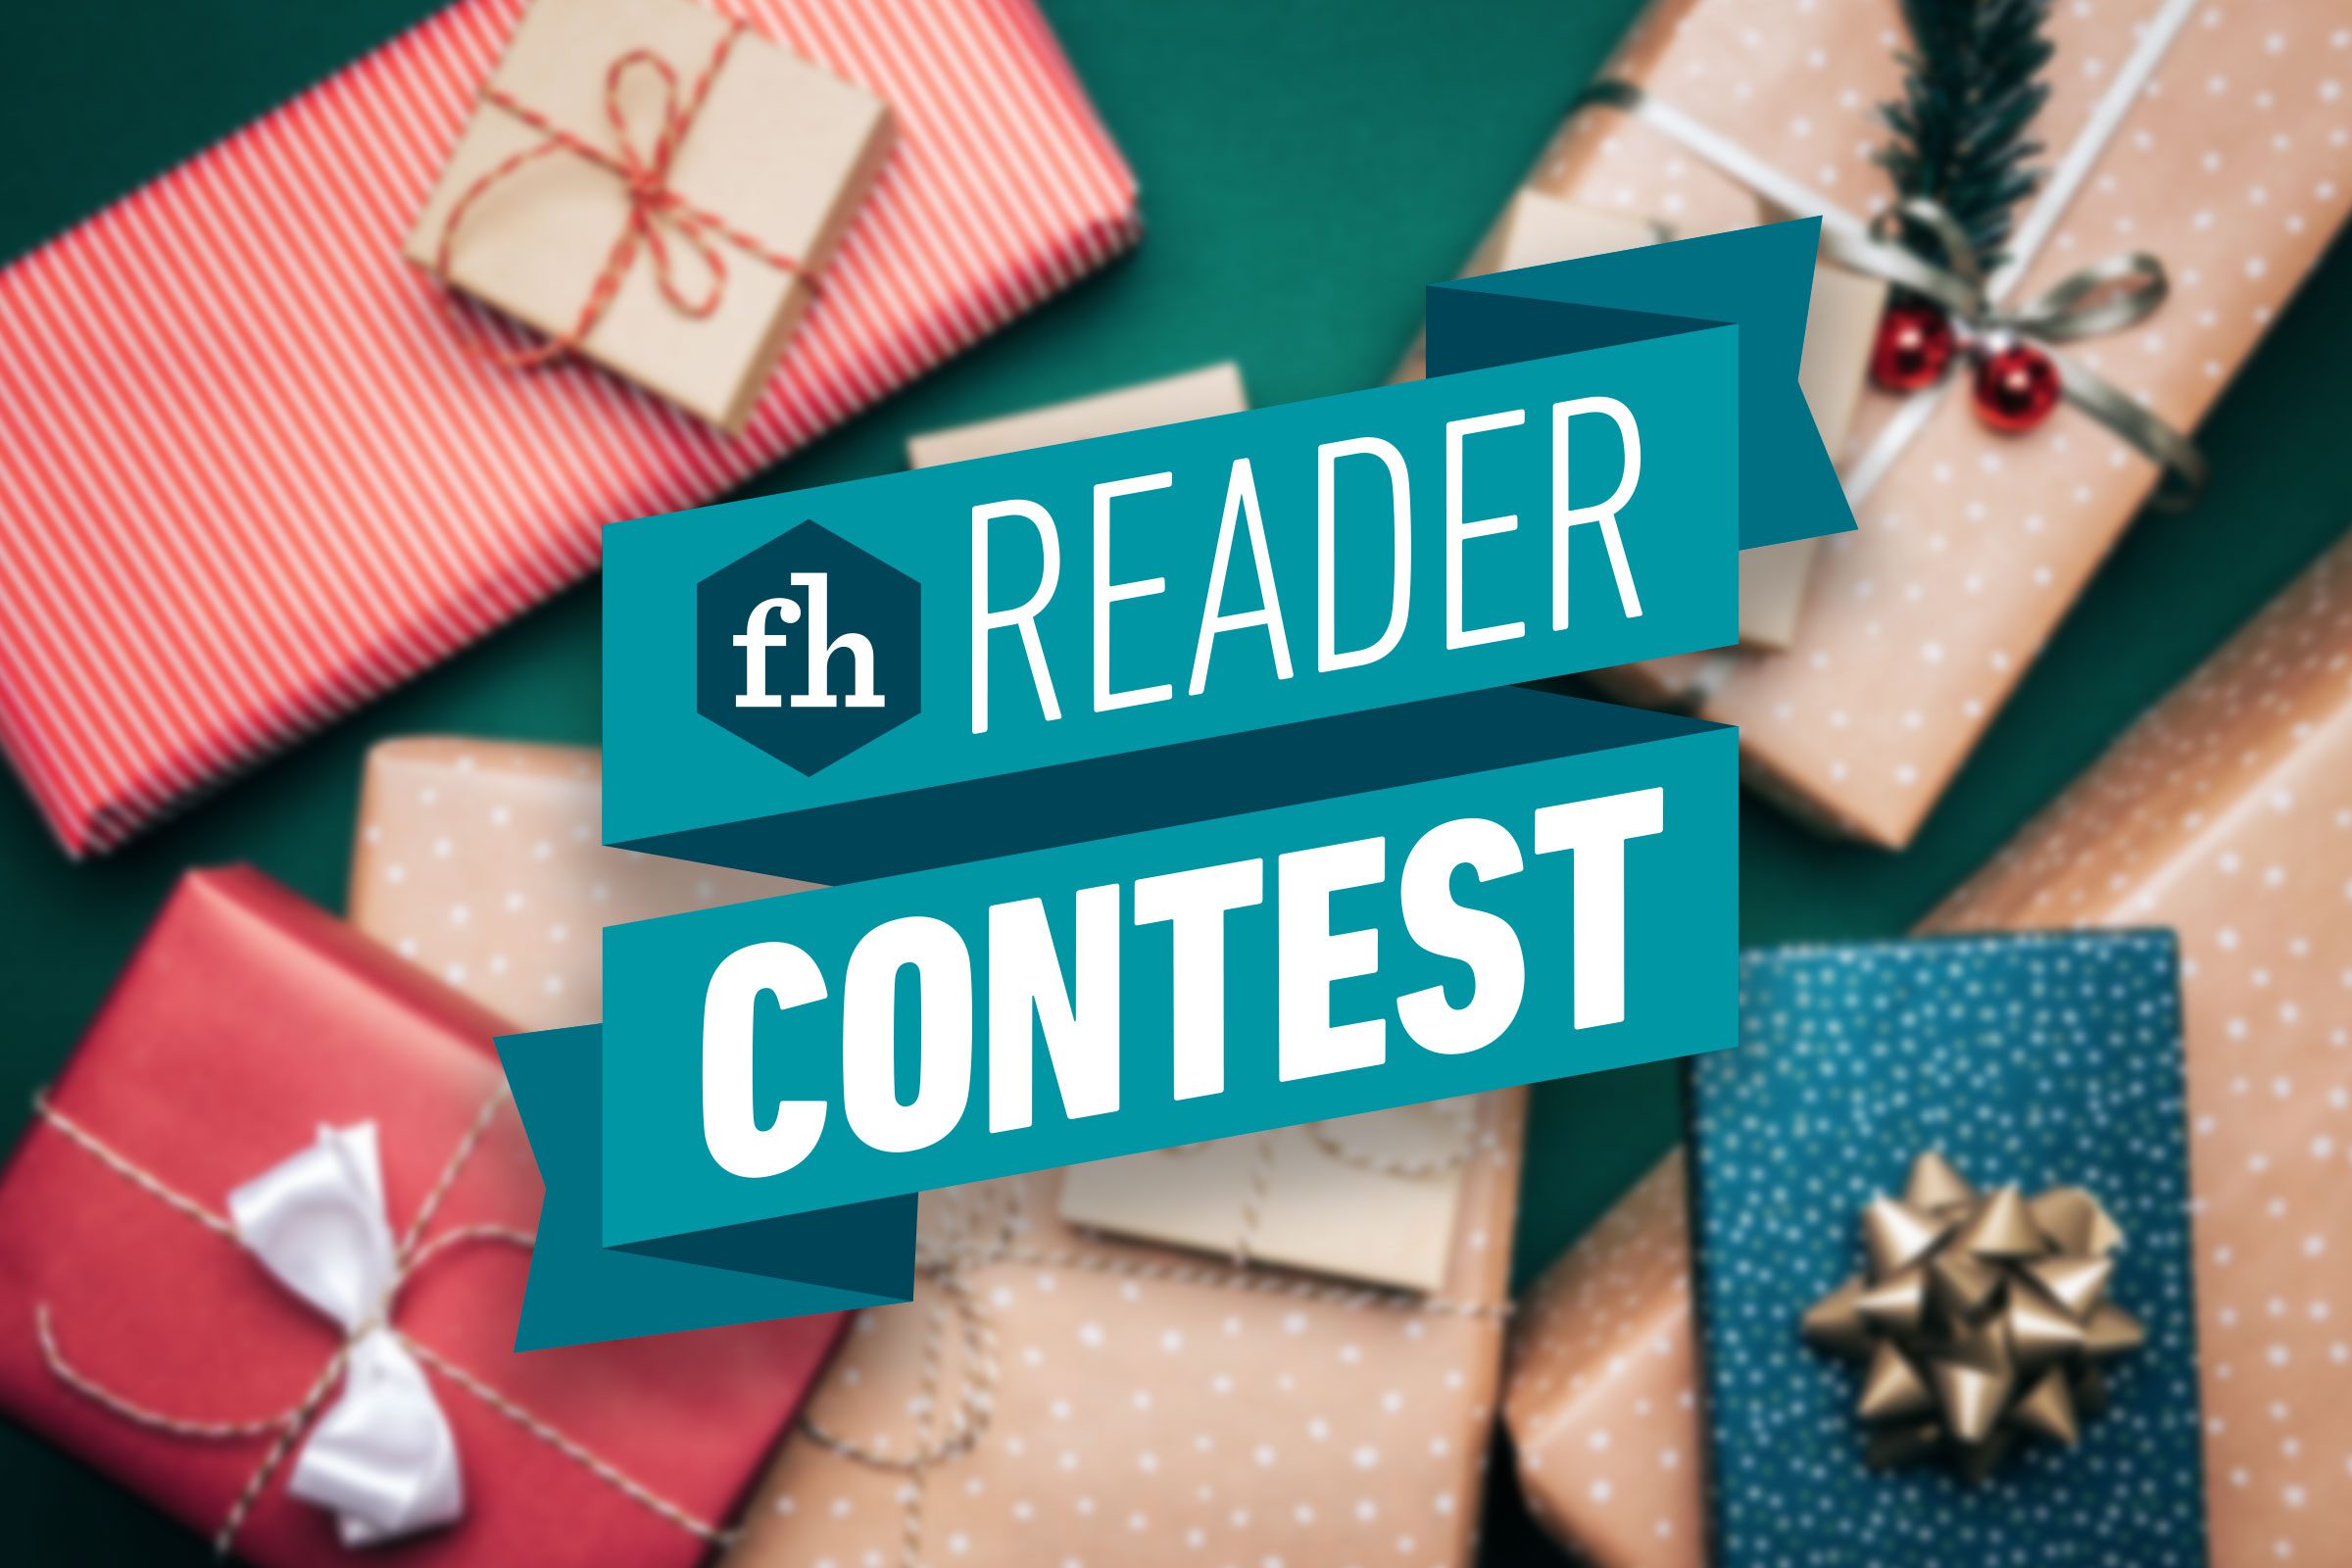 Holiday Spirit Reader Contest logo over an image of holiday gifts